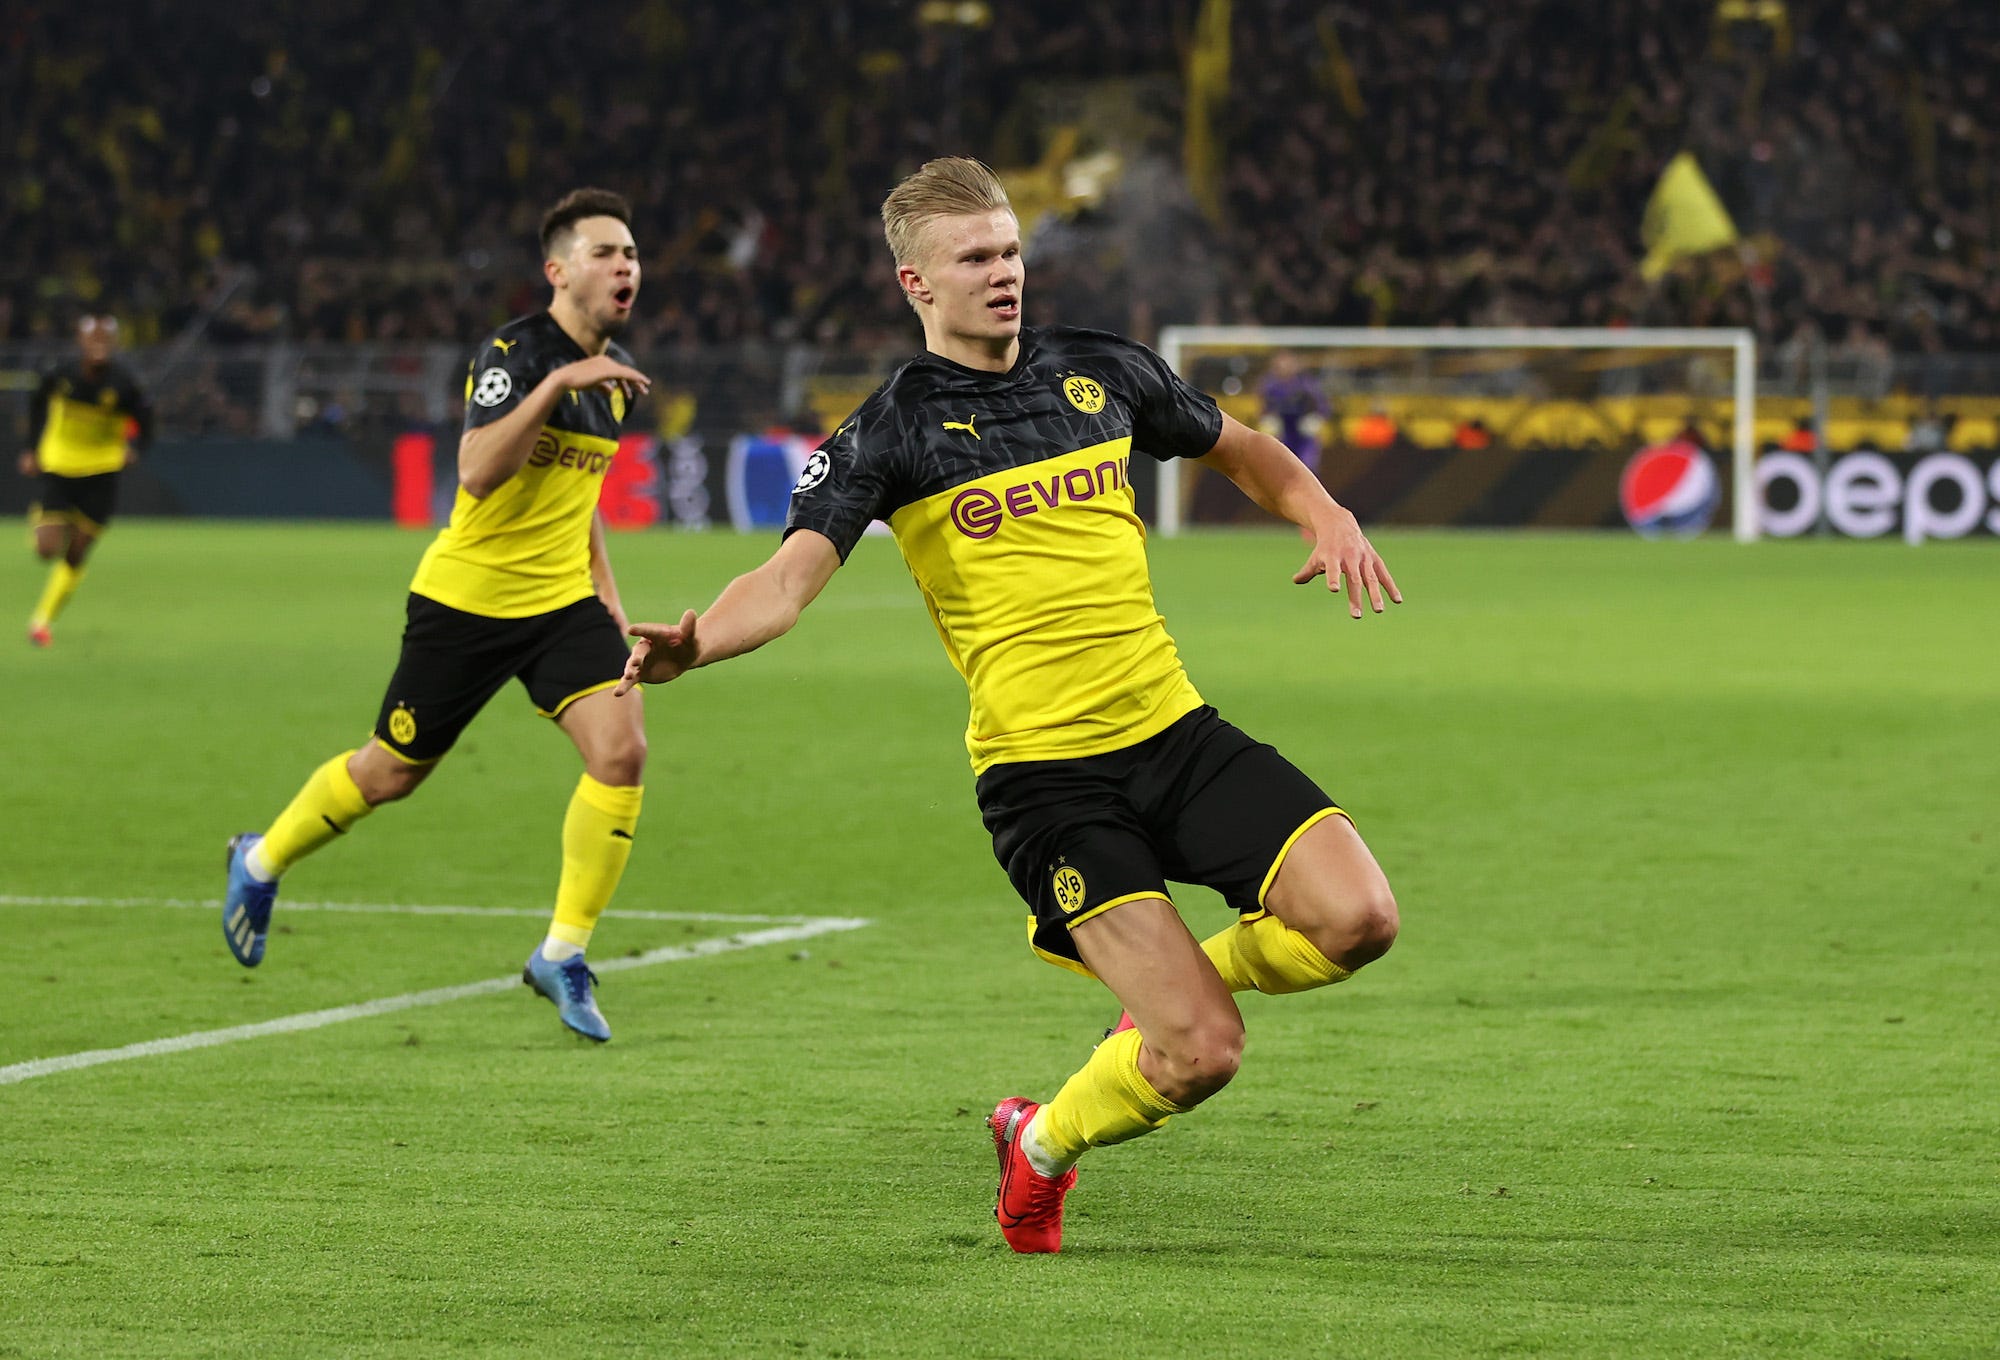 Erling Braut Haaland scored twice in 8 minutes to hand Borussia